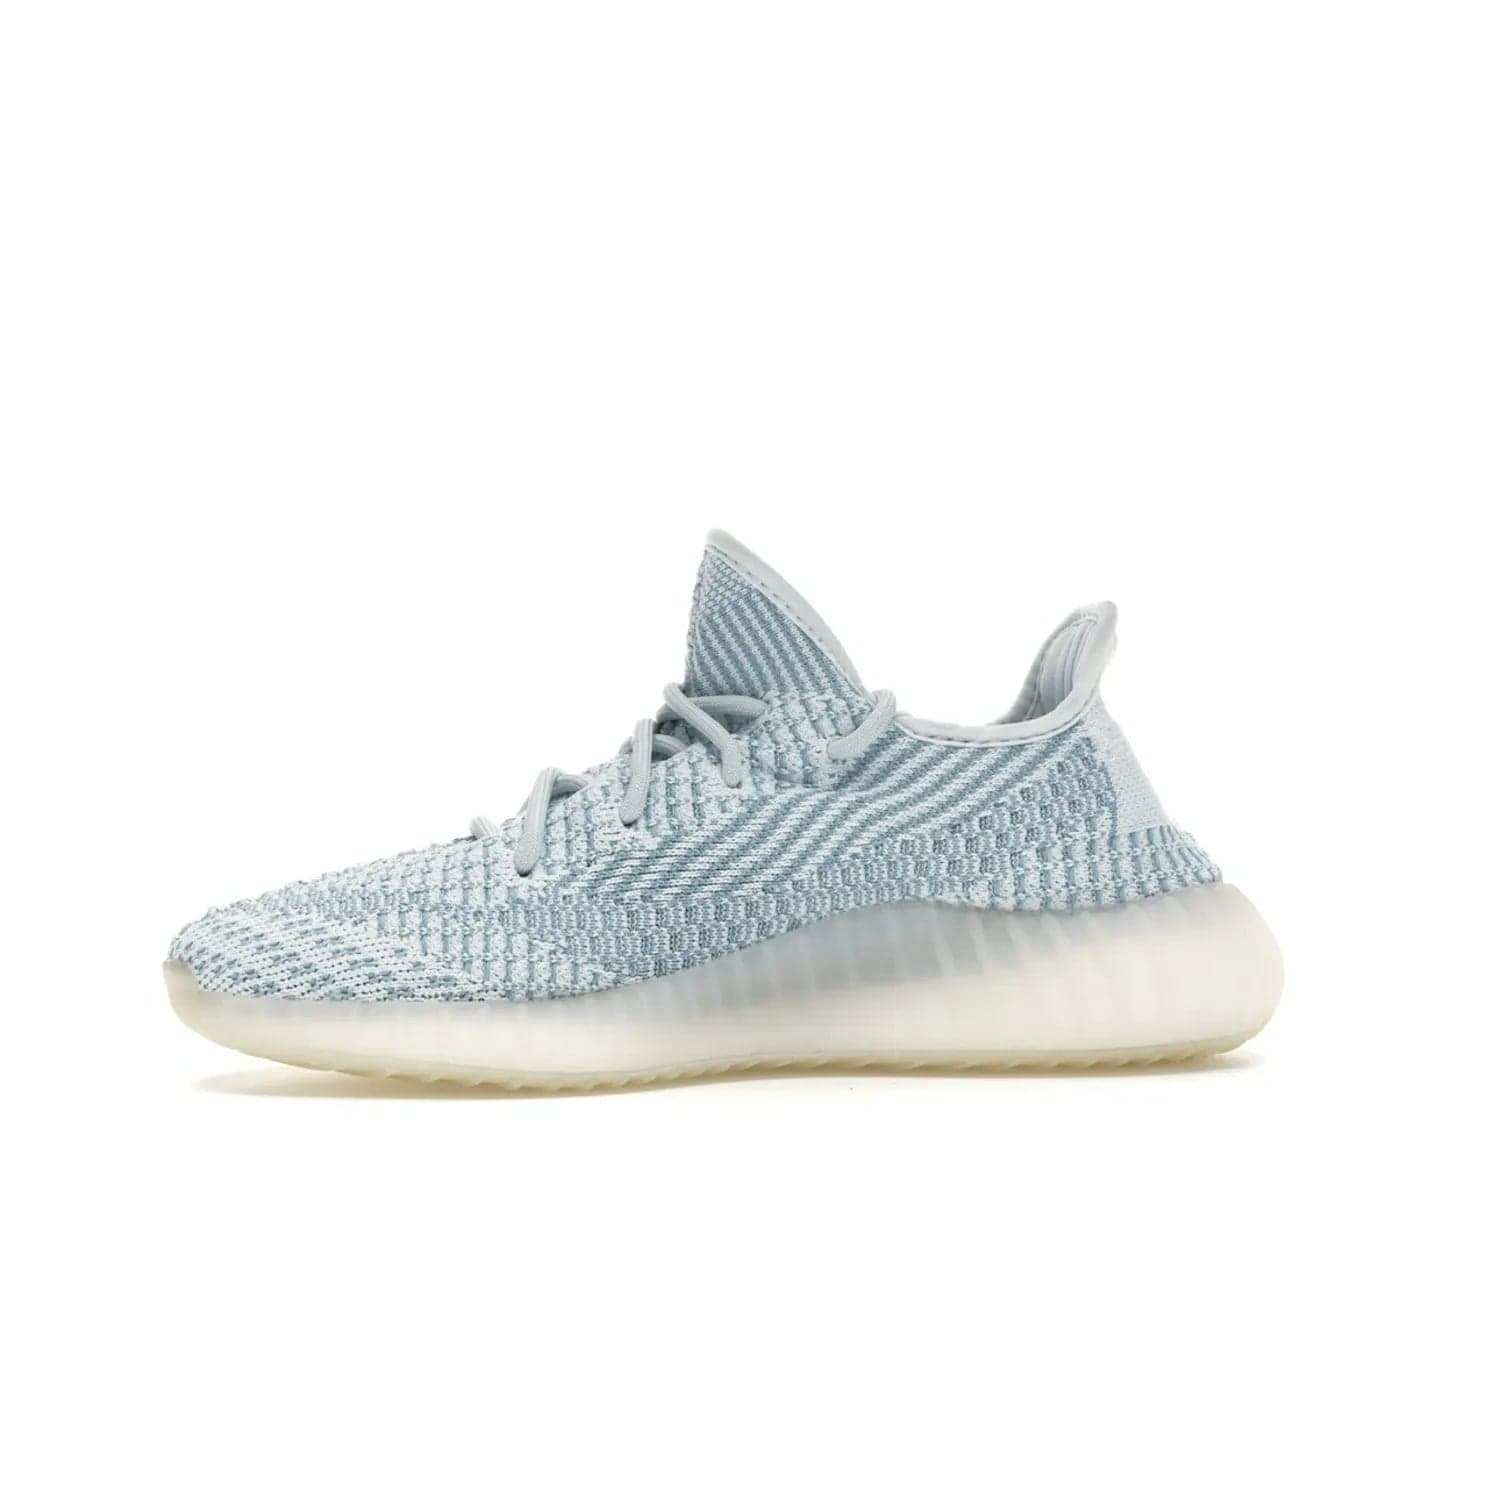 adidas Yeezy Boost 350 V2 Cloud White (Non-Reflective) - Image 18 - Only at www.BallersClubKickz.com - Adidas Yeezy Boost 350 V2 Cloud White (Non-Reflective) features Primeknit fabric and a unique, eye-catching design of cream, bluish-white, and transparent strip. Step out in timeless style with this eye-catching sneaker.